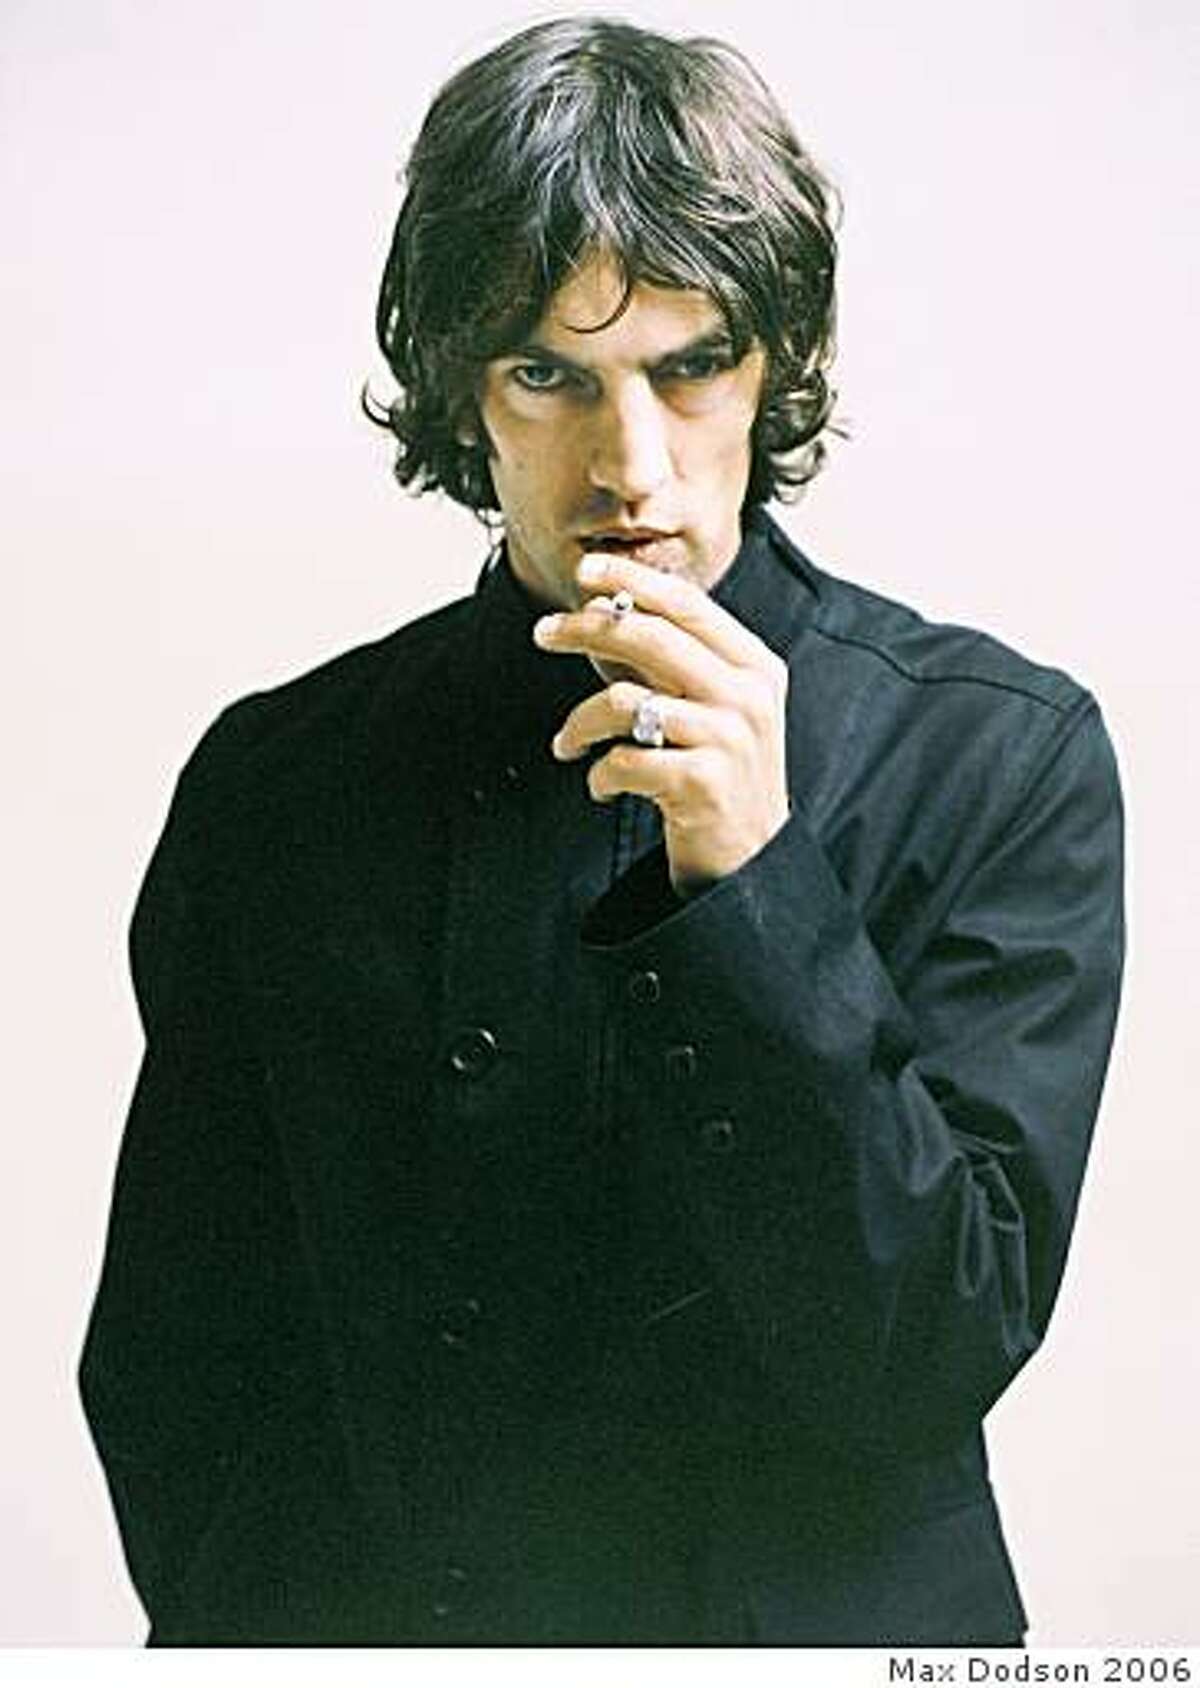 Richard Ashcroft, lead singer of the band the Verve.